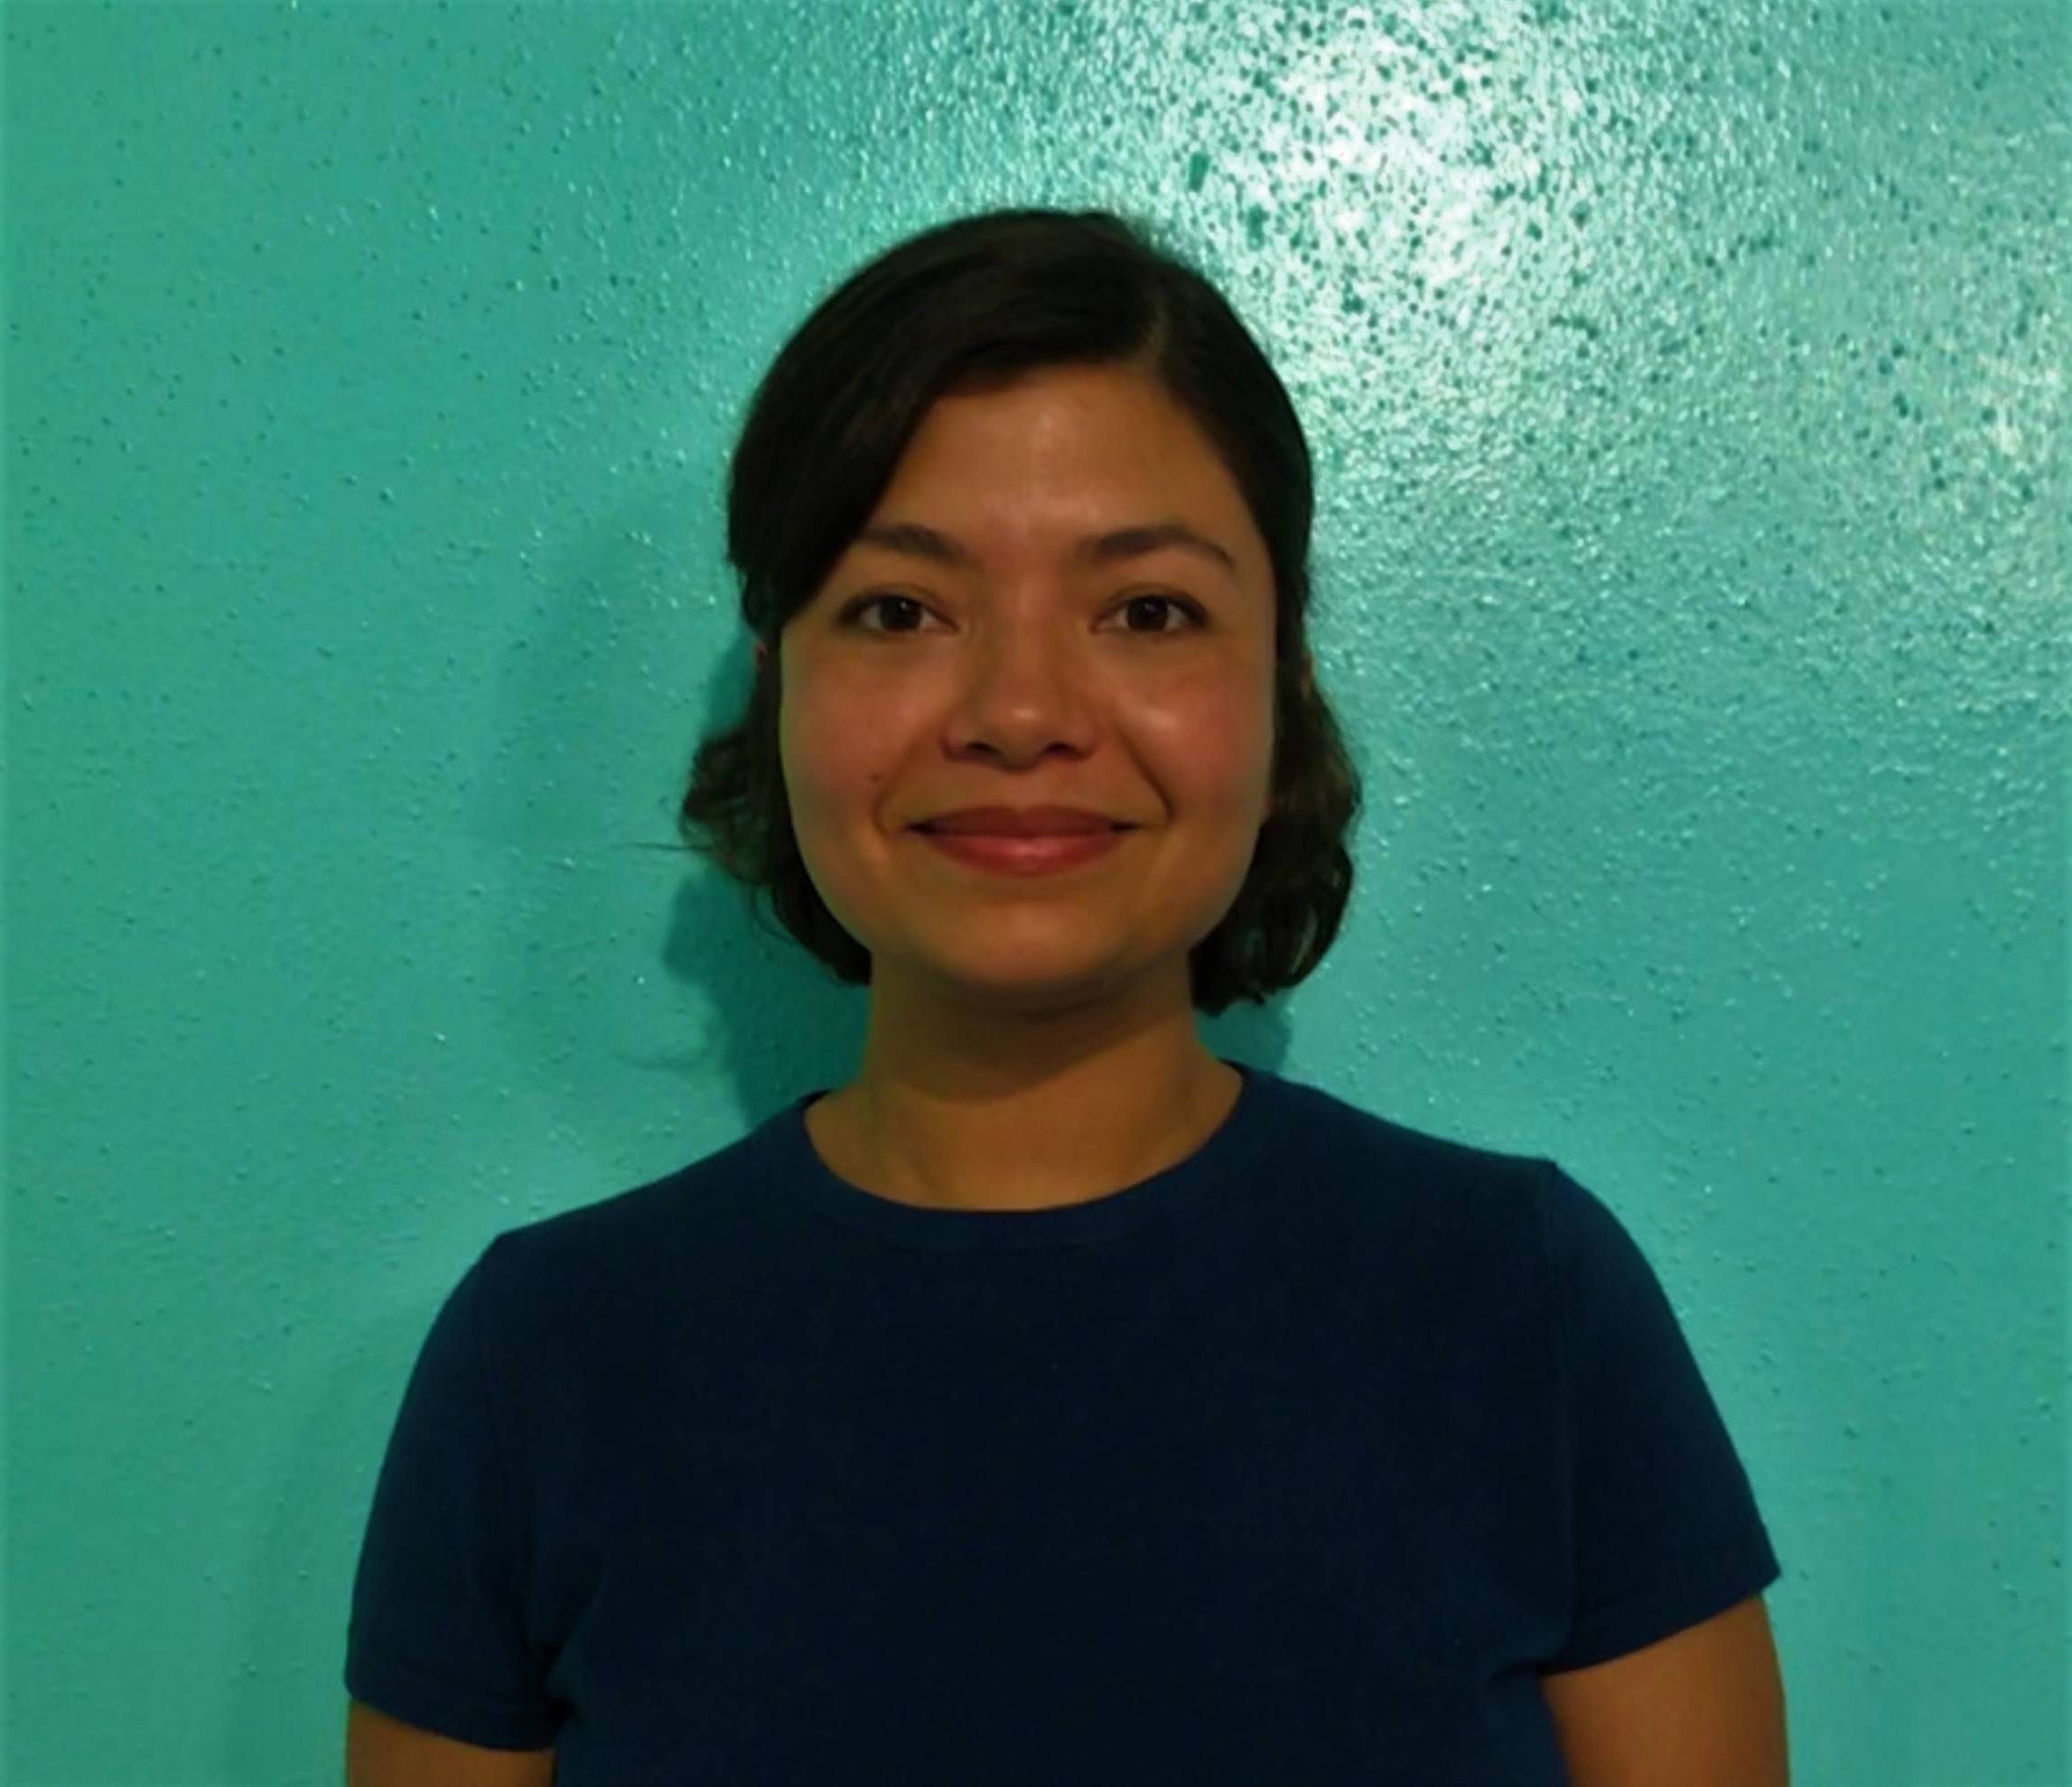 Laura Vazquez Arreguin stands smiling in front of a teal-colored wall